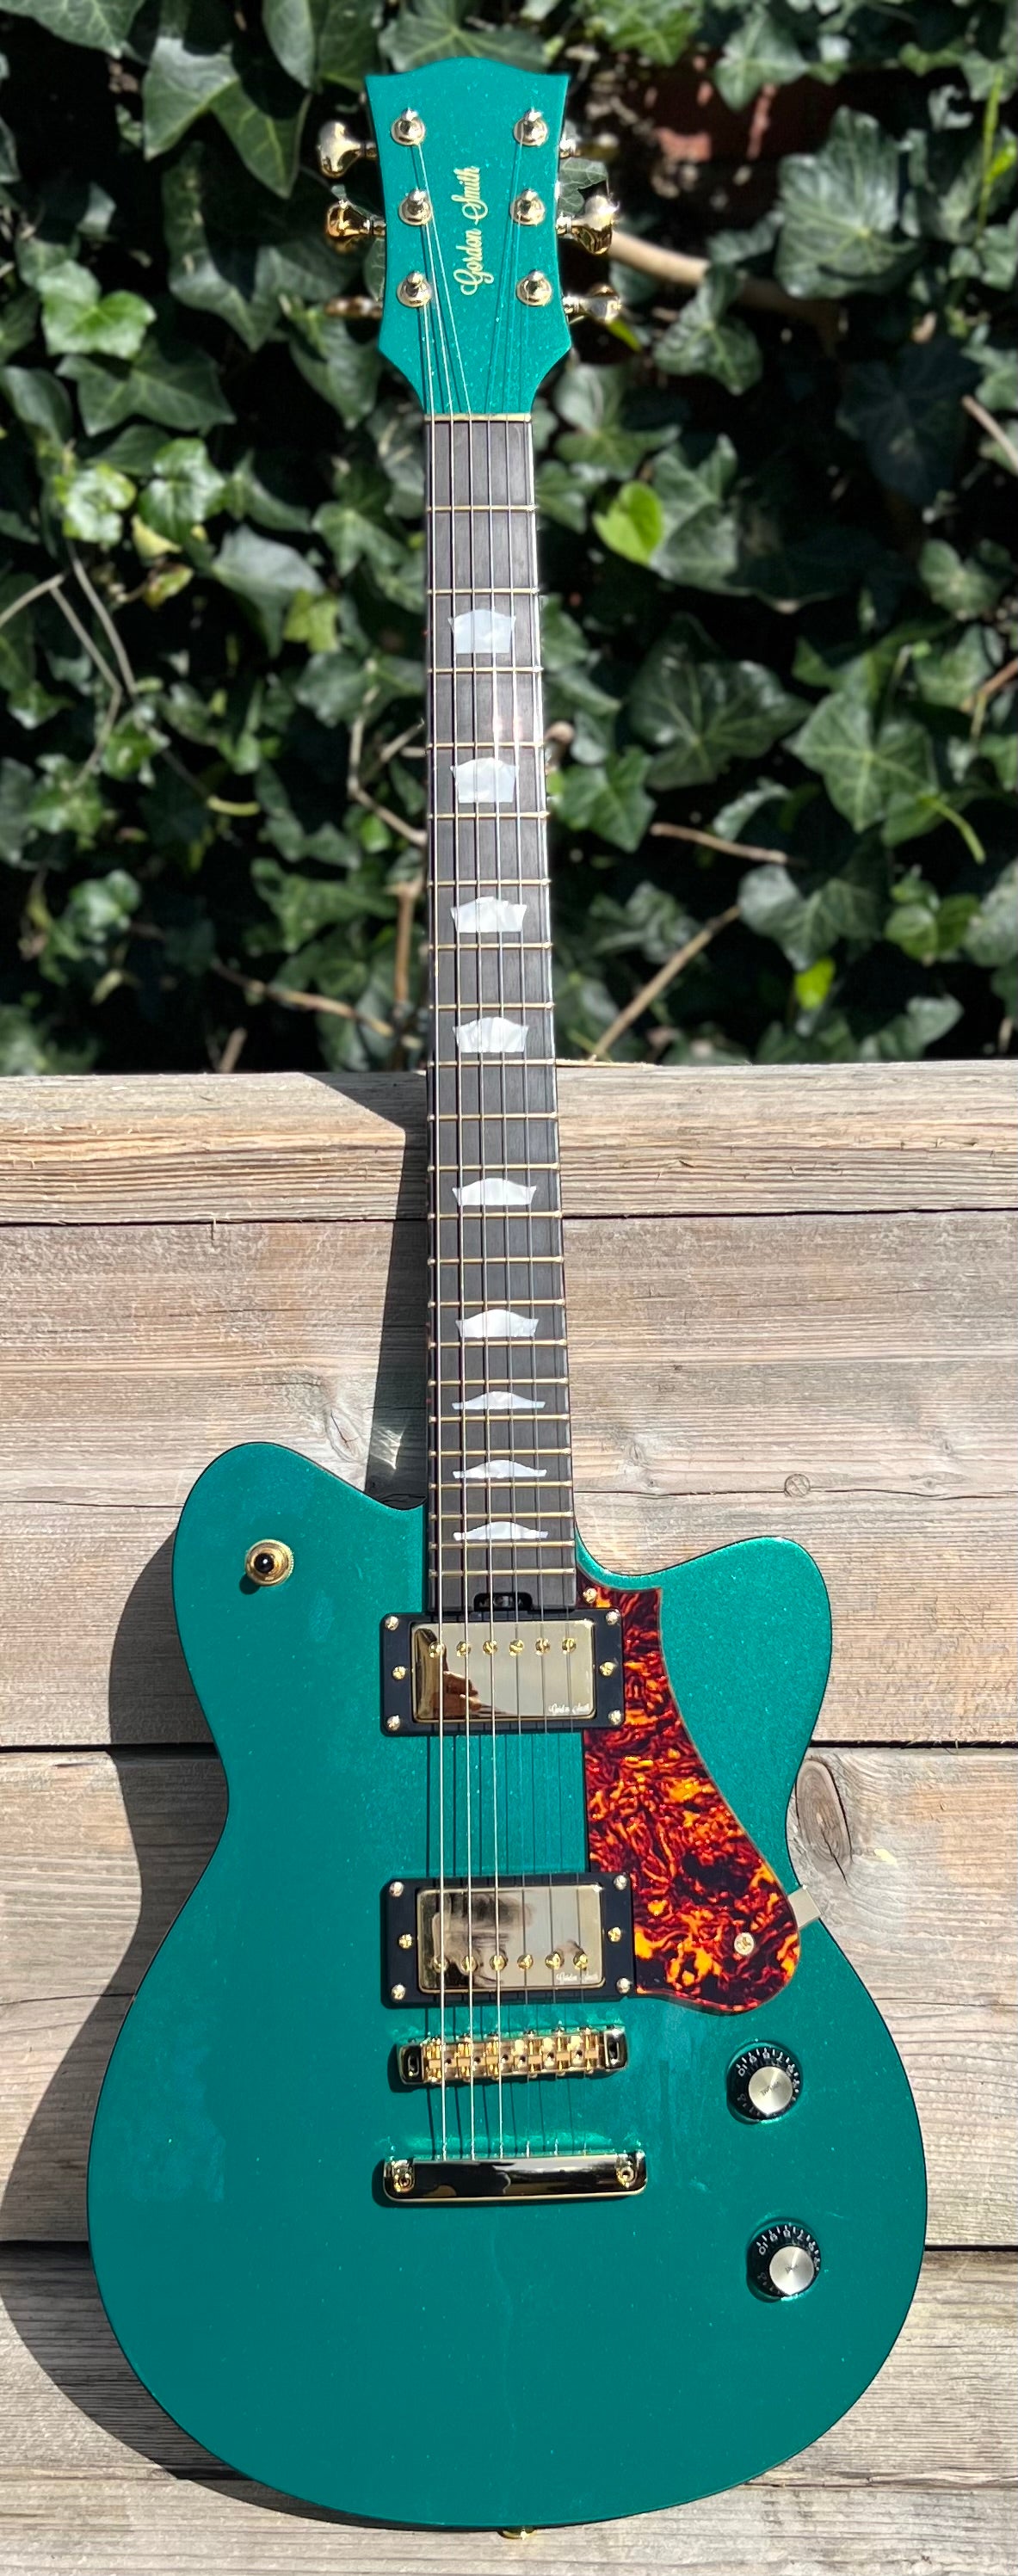 Gordon Smith Grande (Green) Plus Hand Made Walsall Leather Guitar Strap (Worth £120), Electric Guitar for sale at Richards Guitars.